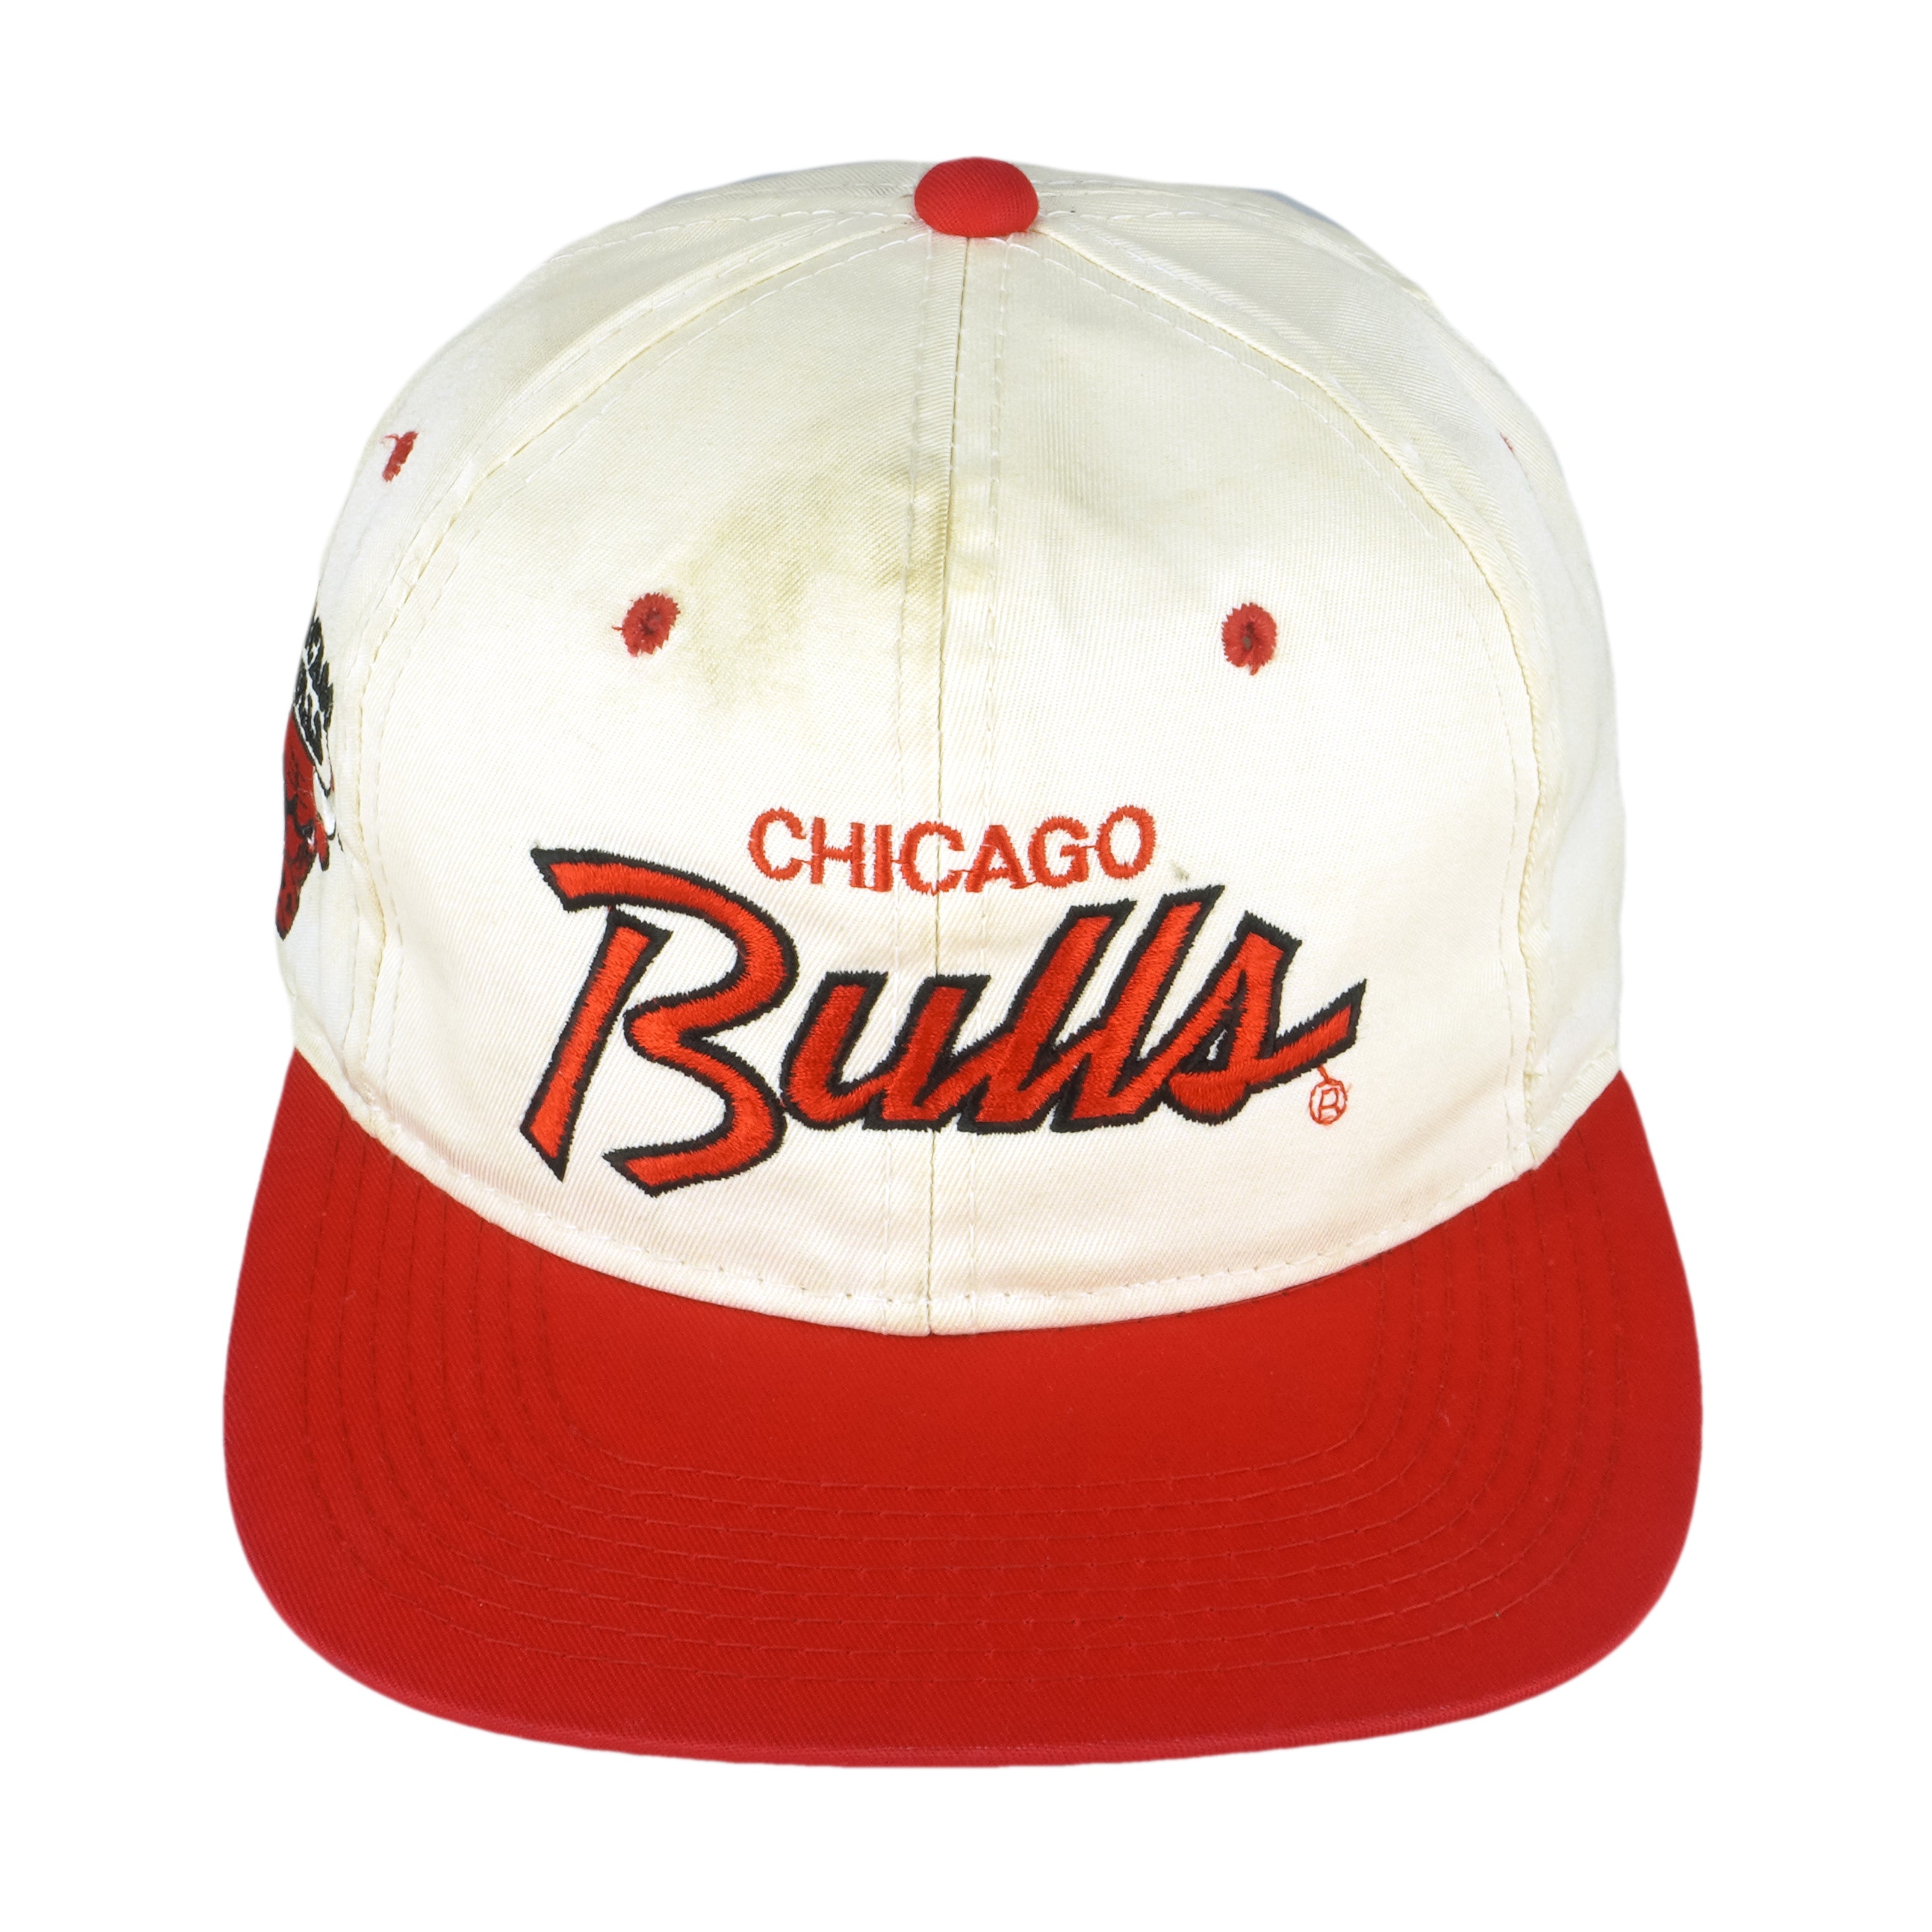 Vintage Chicago Bulls Sports Specialties Fitted Hat Size 7 1/2 